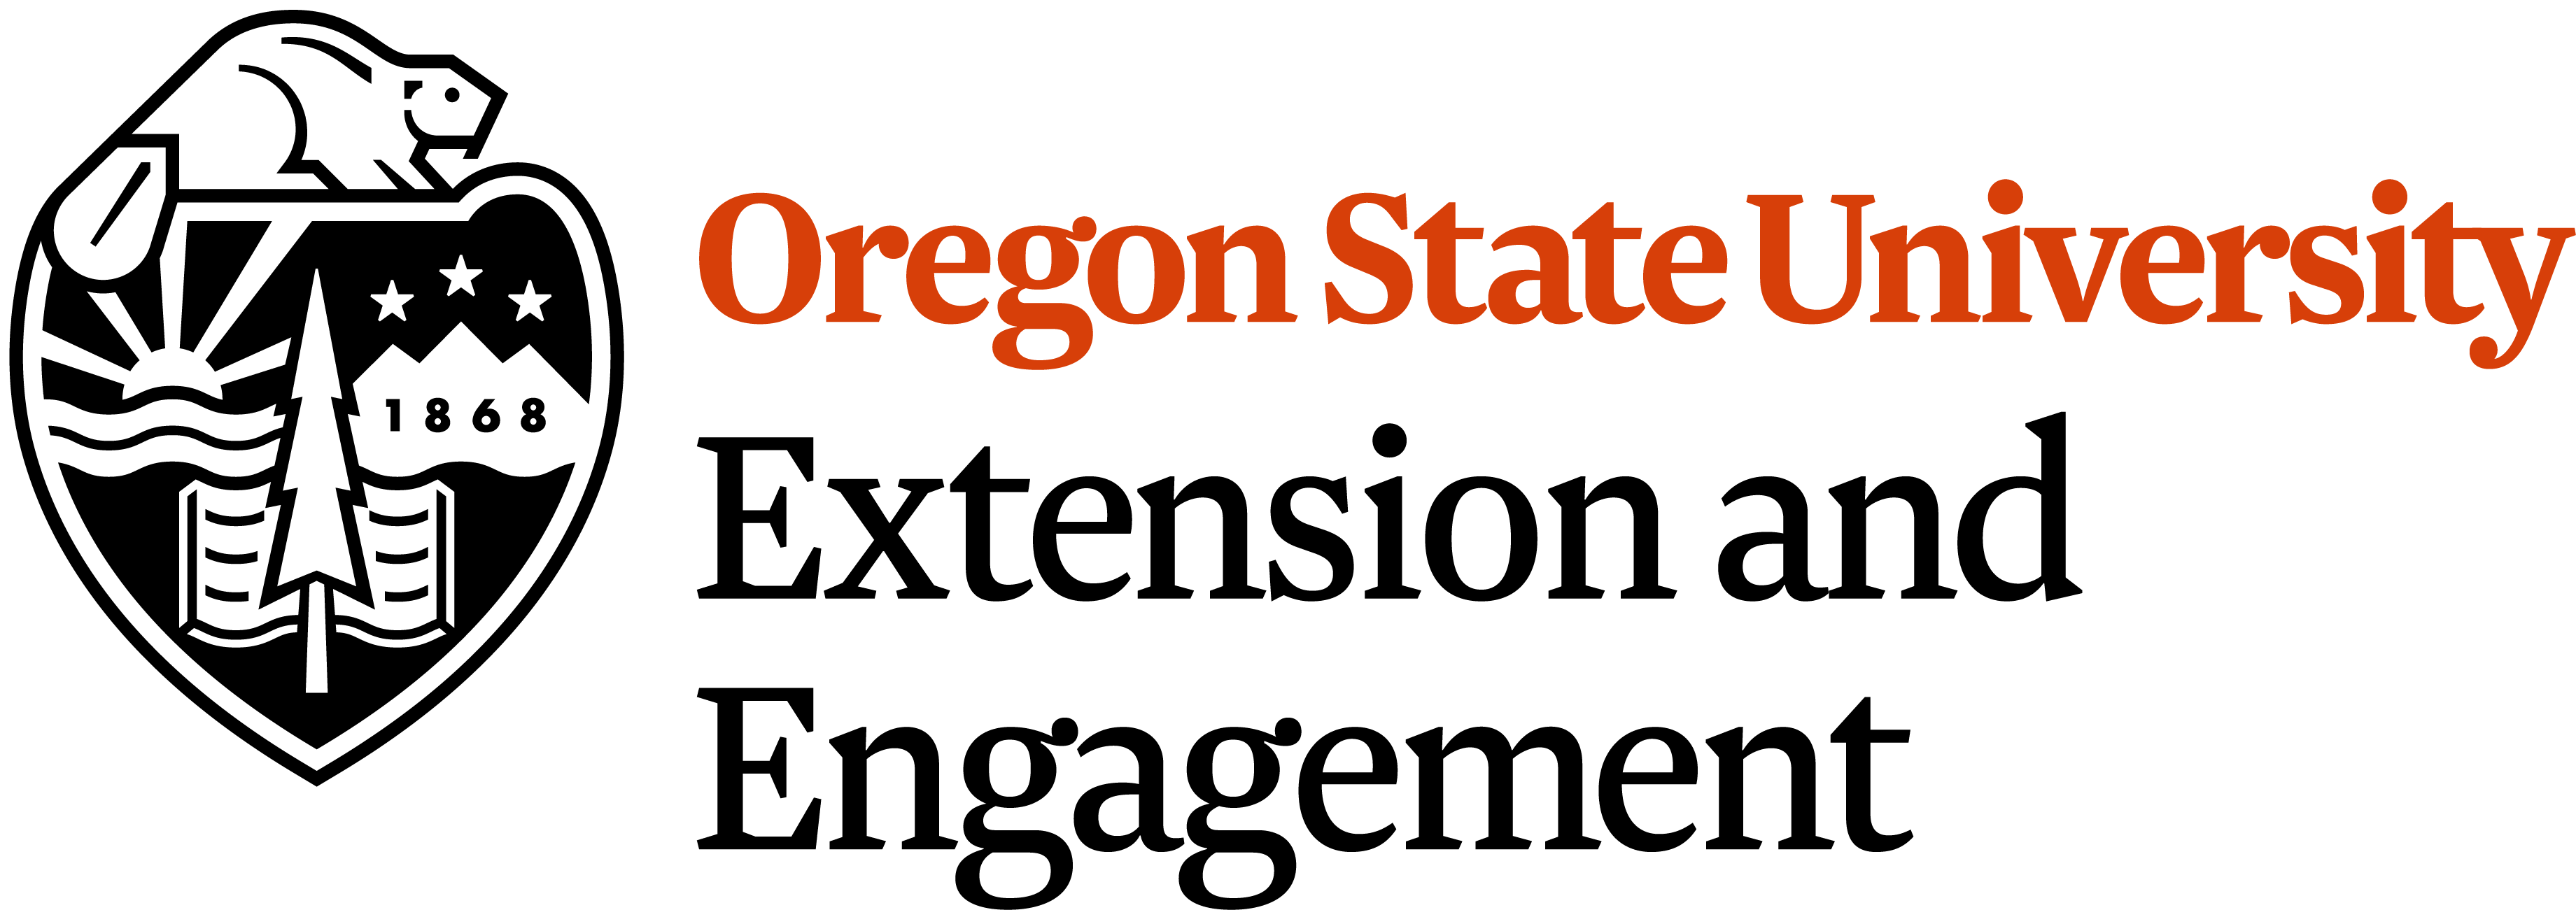 Oregon State University, Division of Extension and Engagement